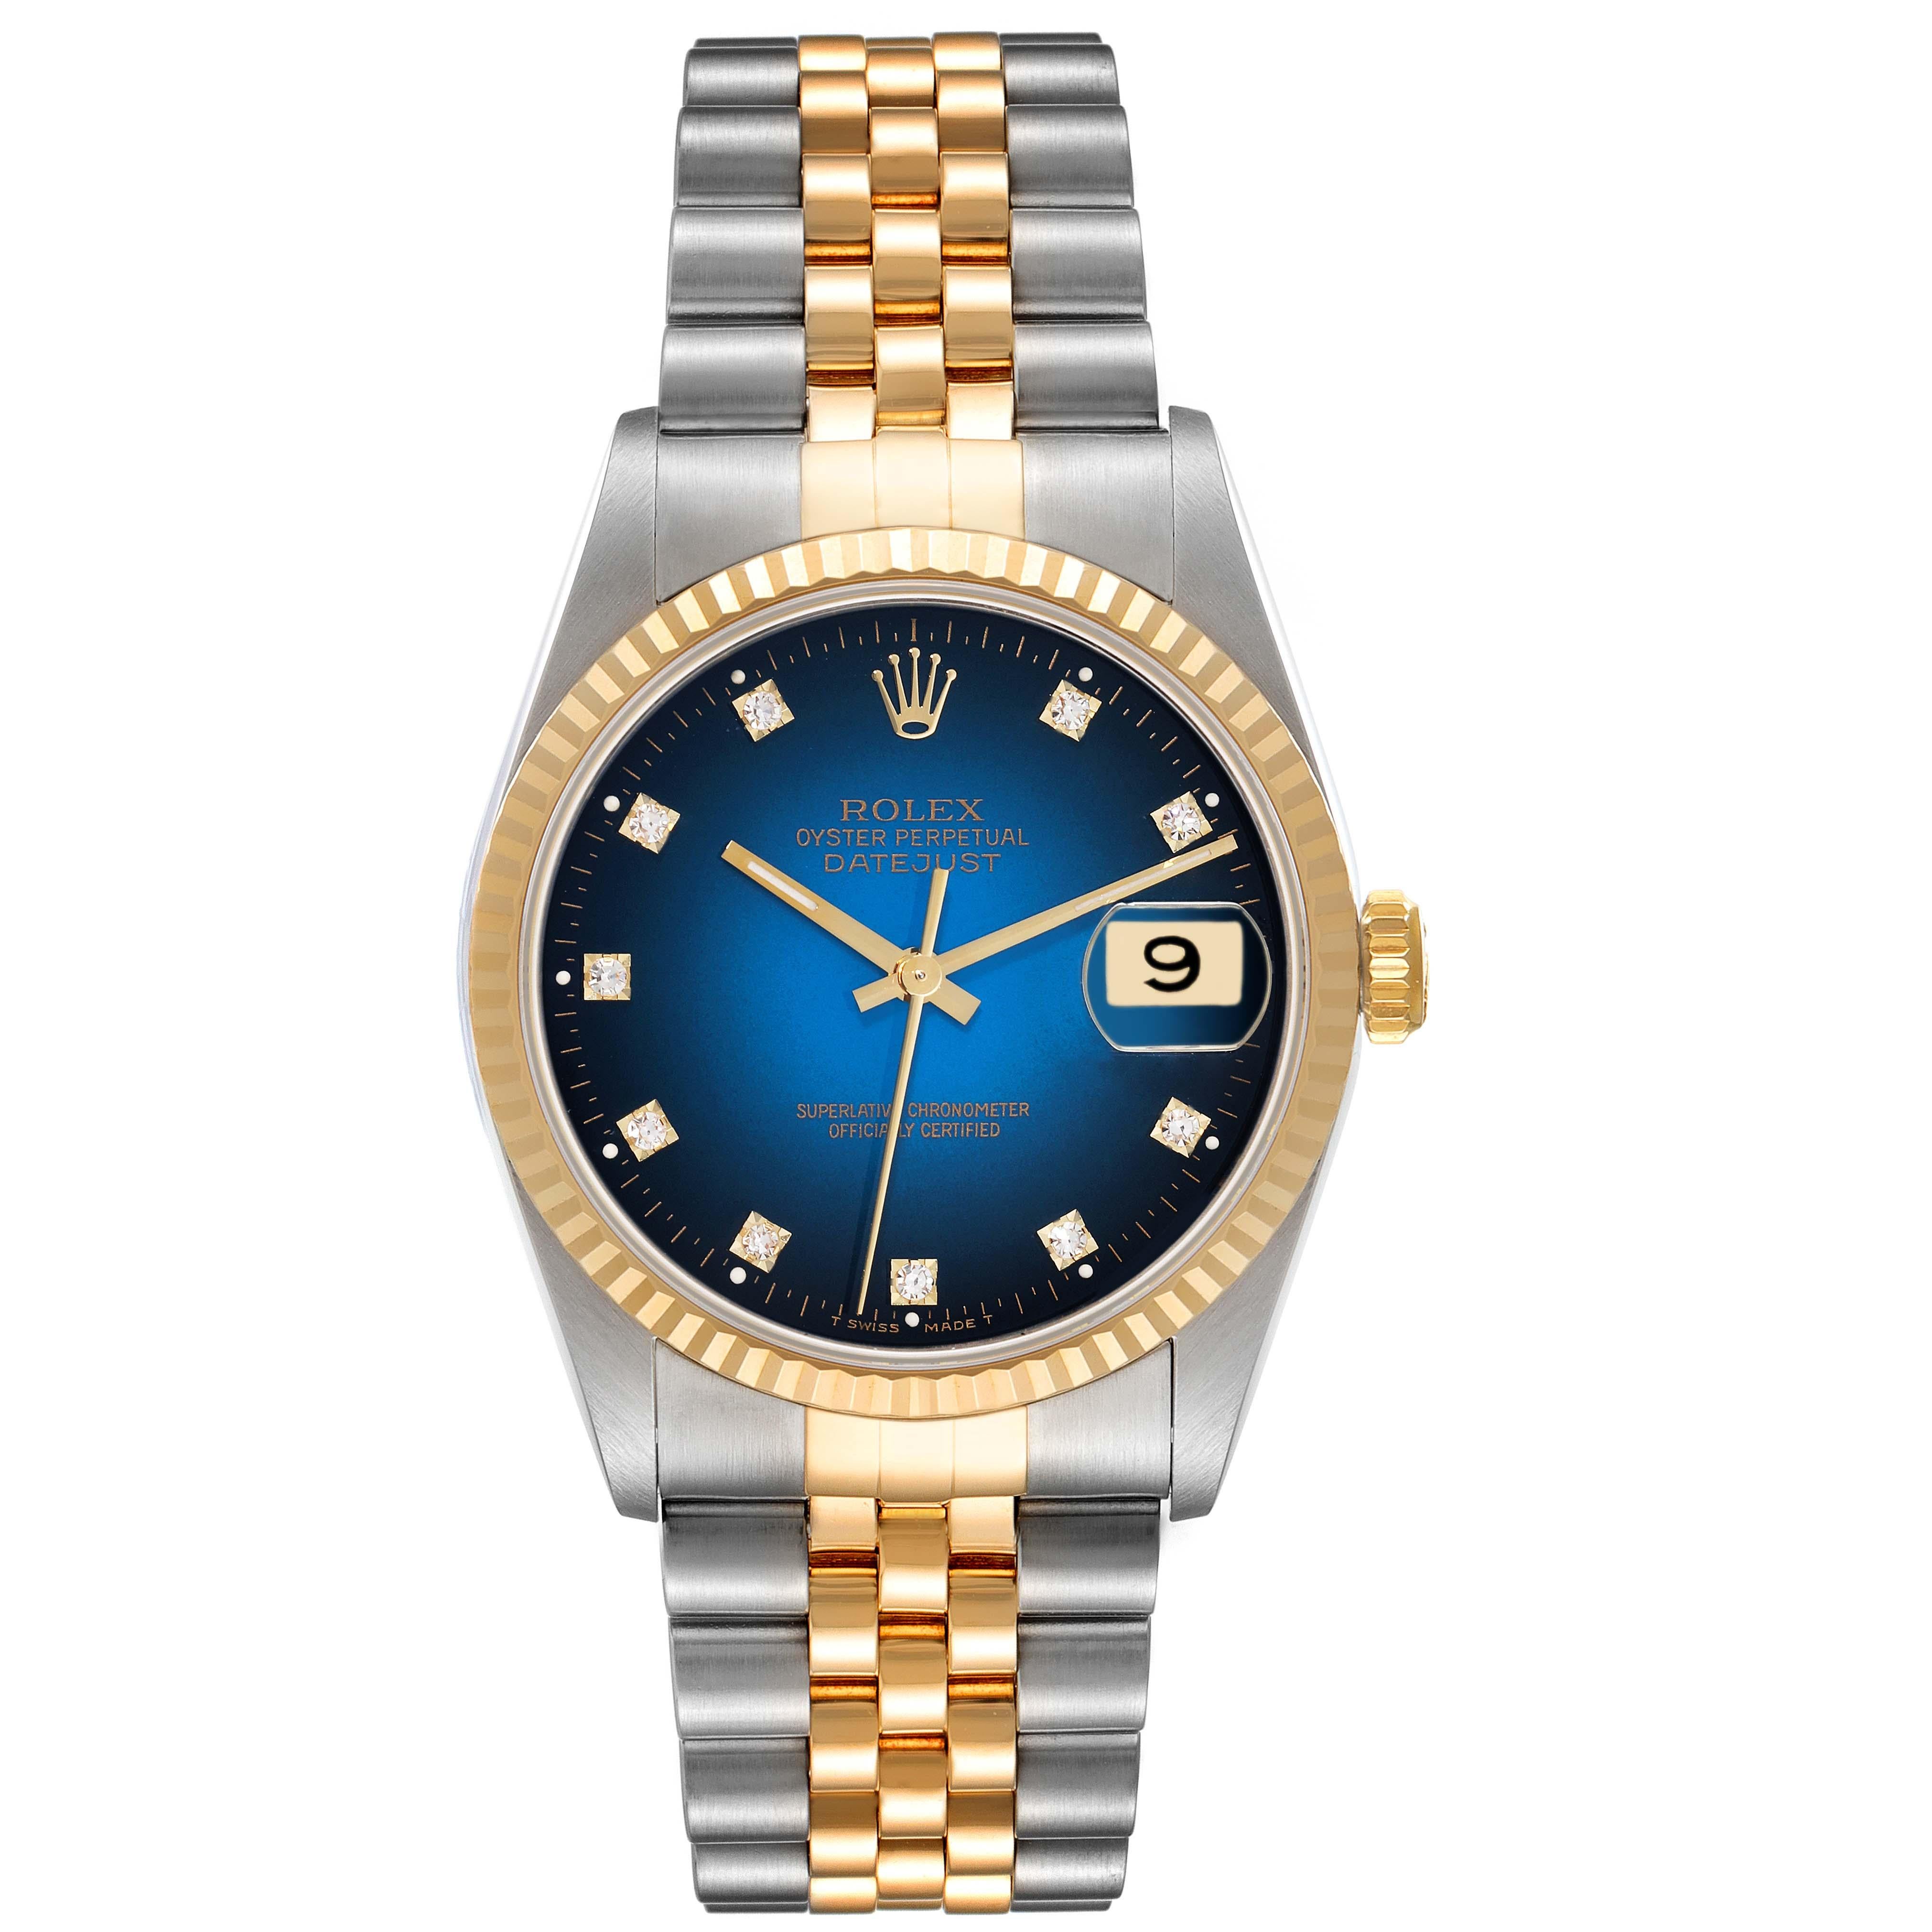 Rolex Datejust Blue Vignette Diamond Dial Steel Yellow Gold Mens Watch 16233. Officially certified chronometer automatic self-winding movement. Stainless steel case 36.0 mm in diameter.  Rolex logo on an 18K yellow gold crown. 18k yellow gold fluted